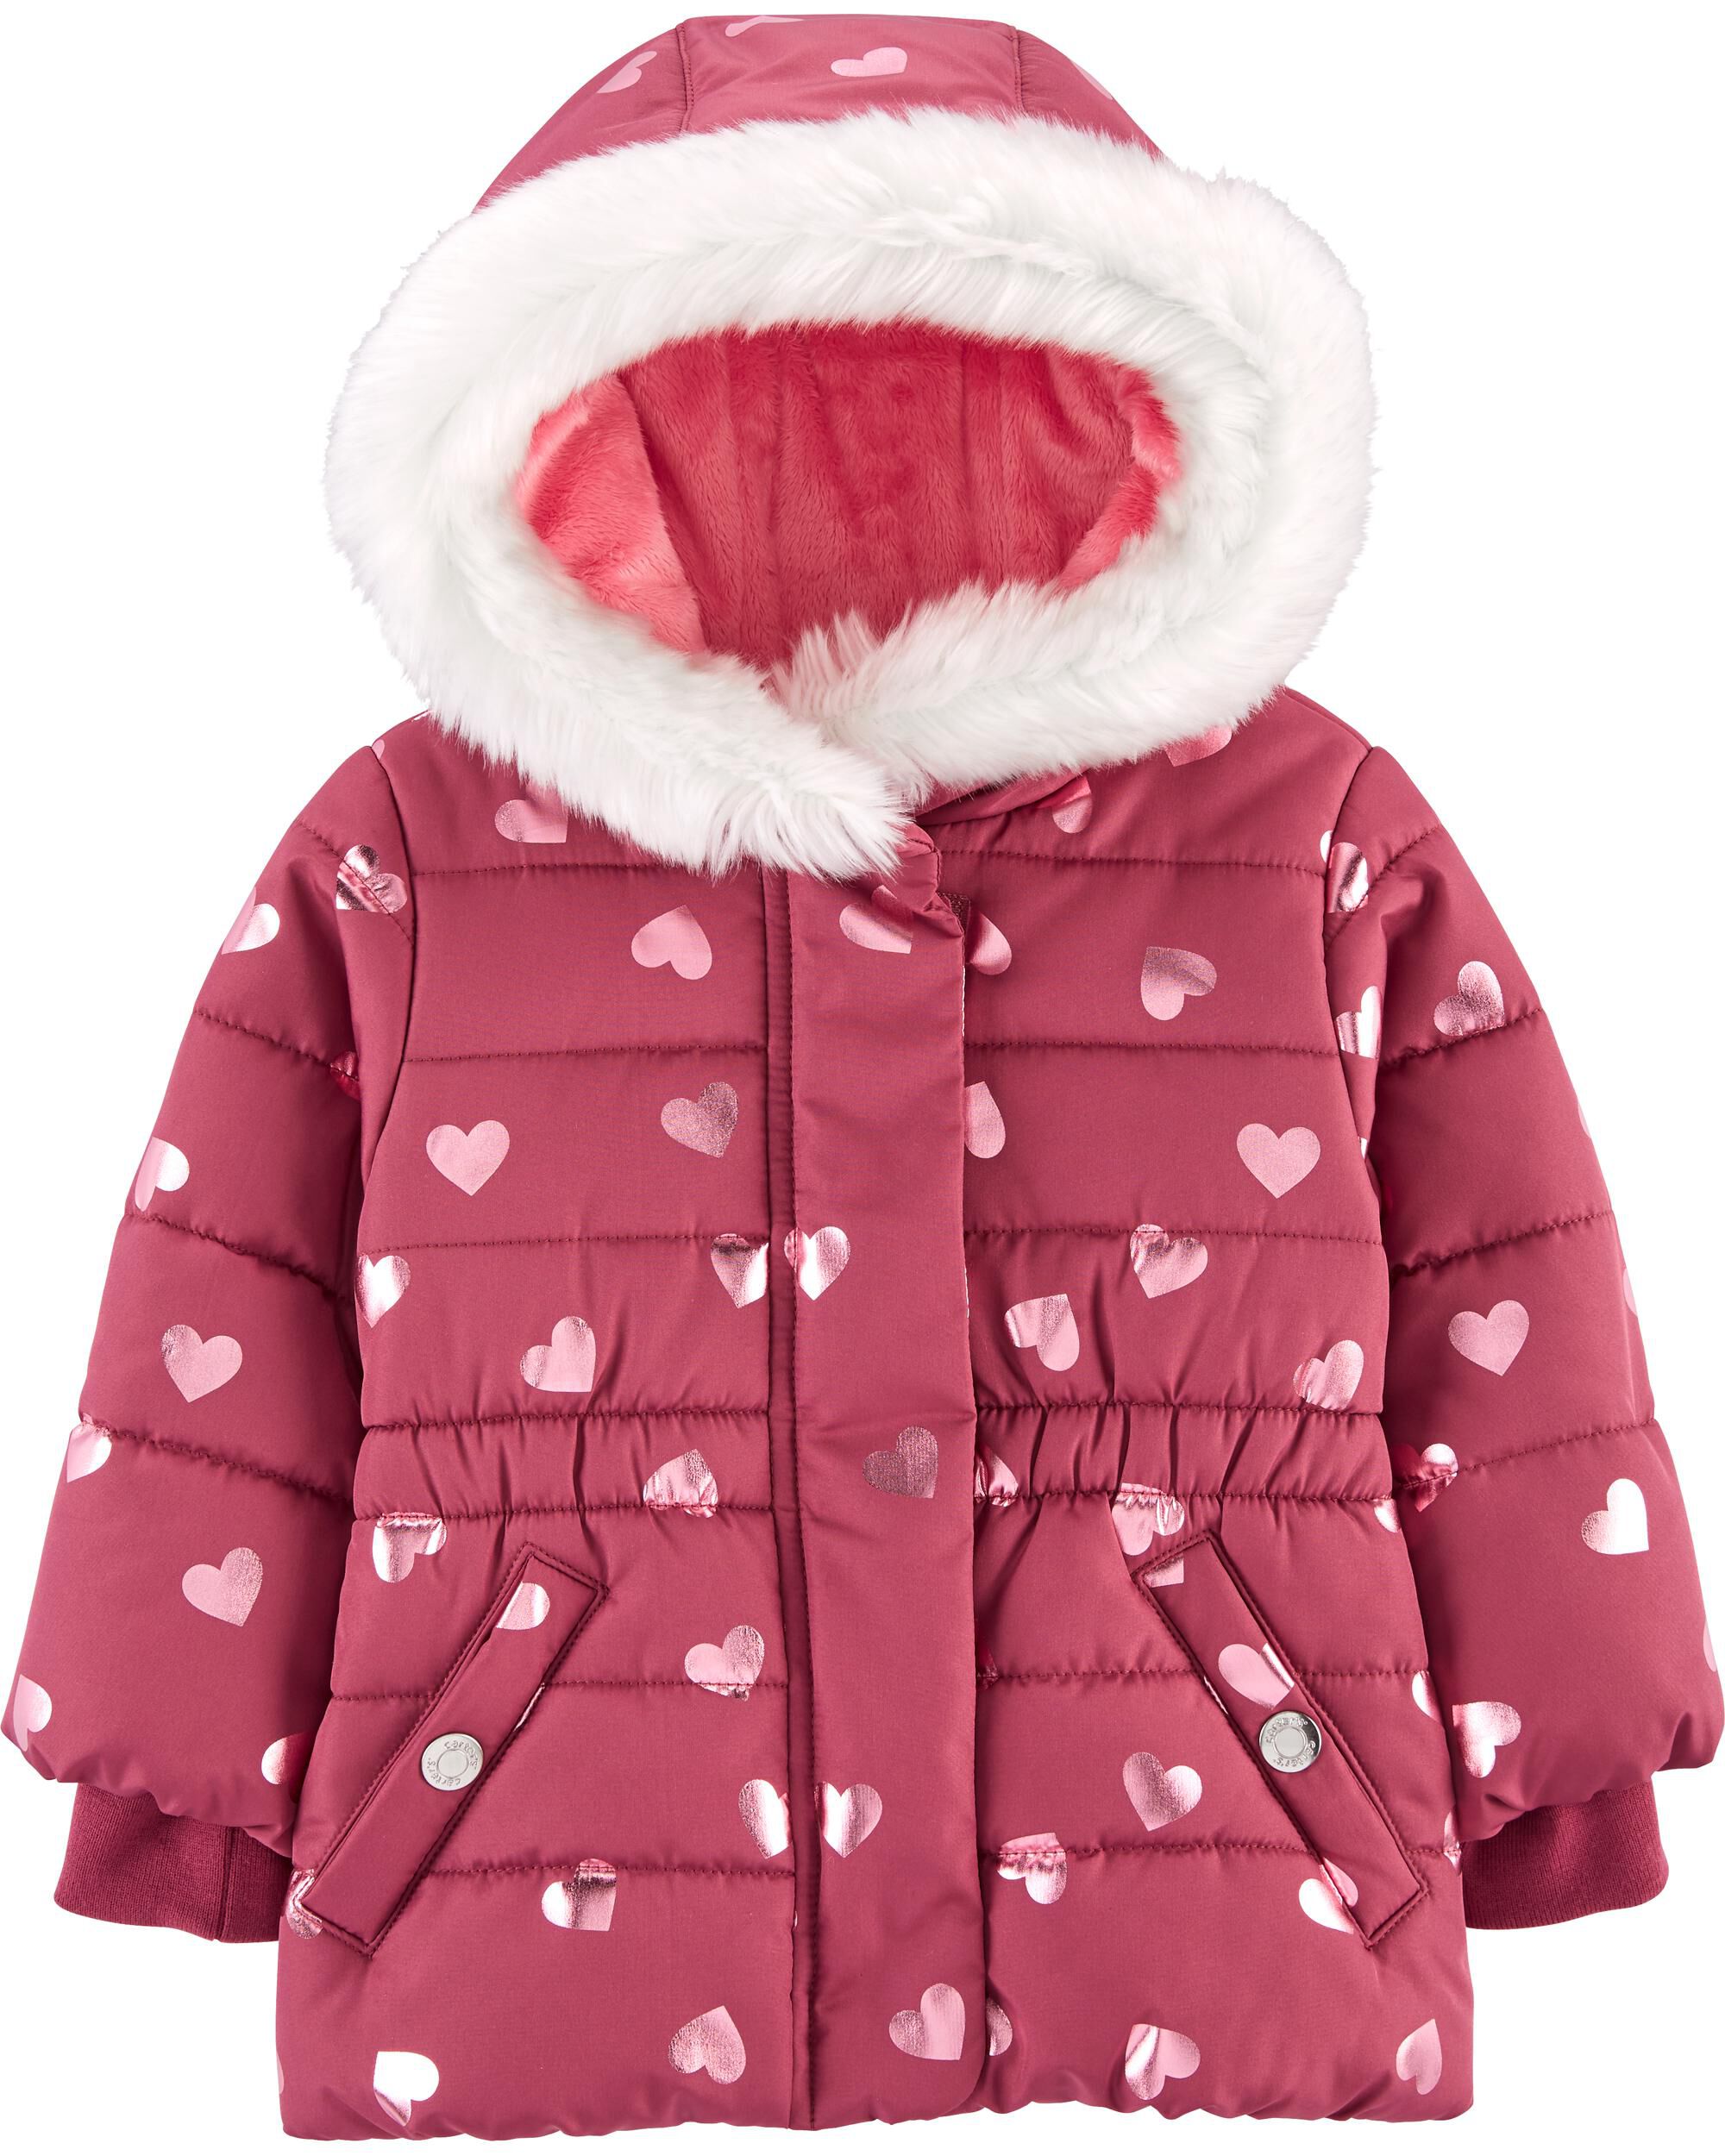 18 month old girl coats